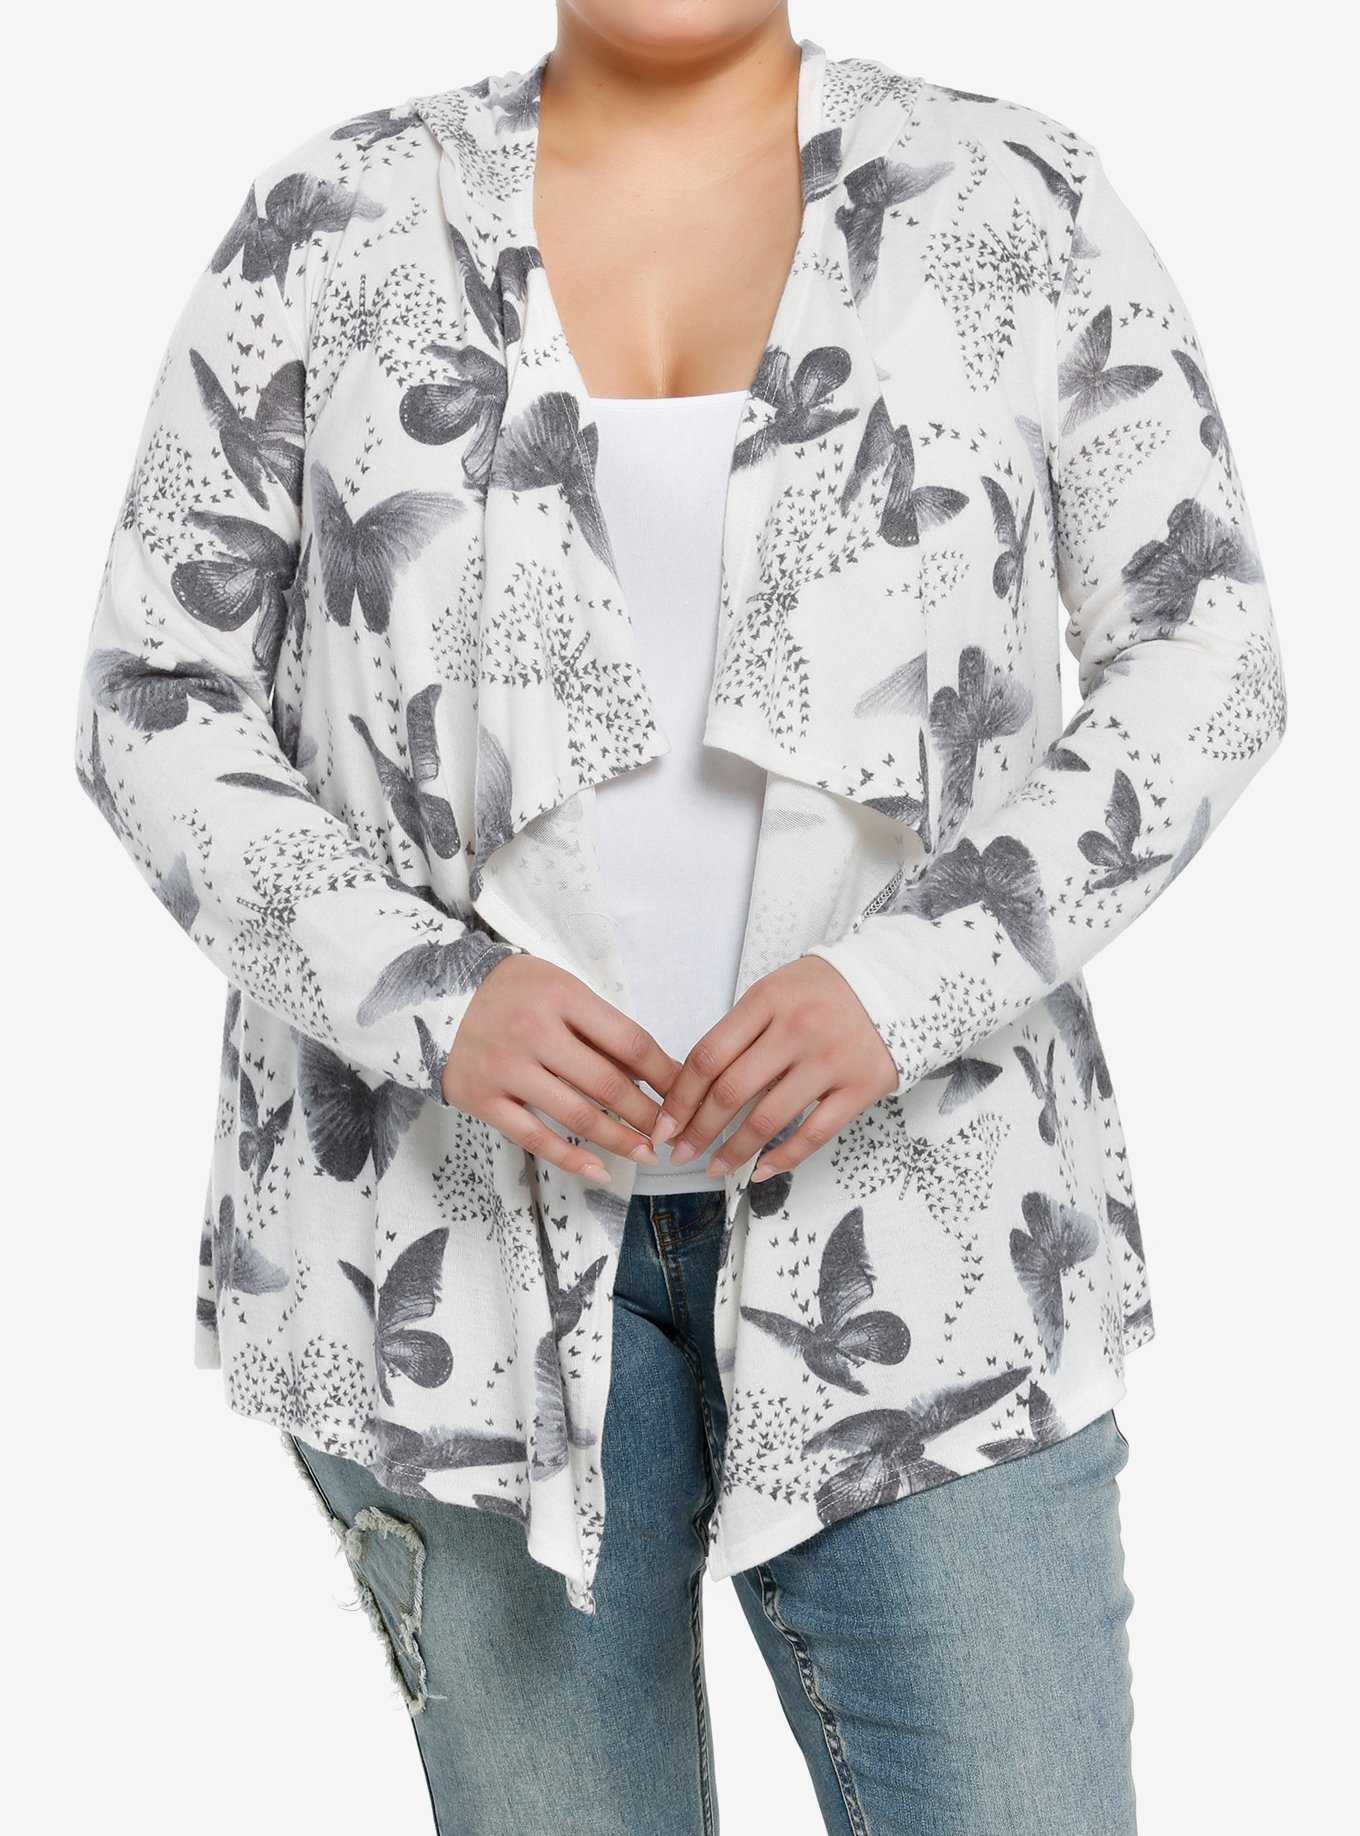 Thorn & Fable Butterflies Cream Hooded Girls Cardigan Plus Size, , hi-res